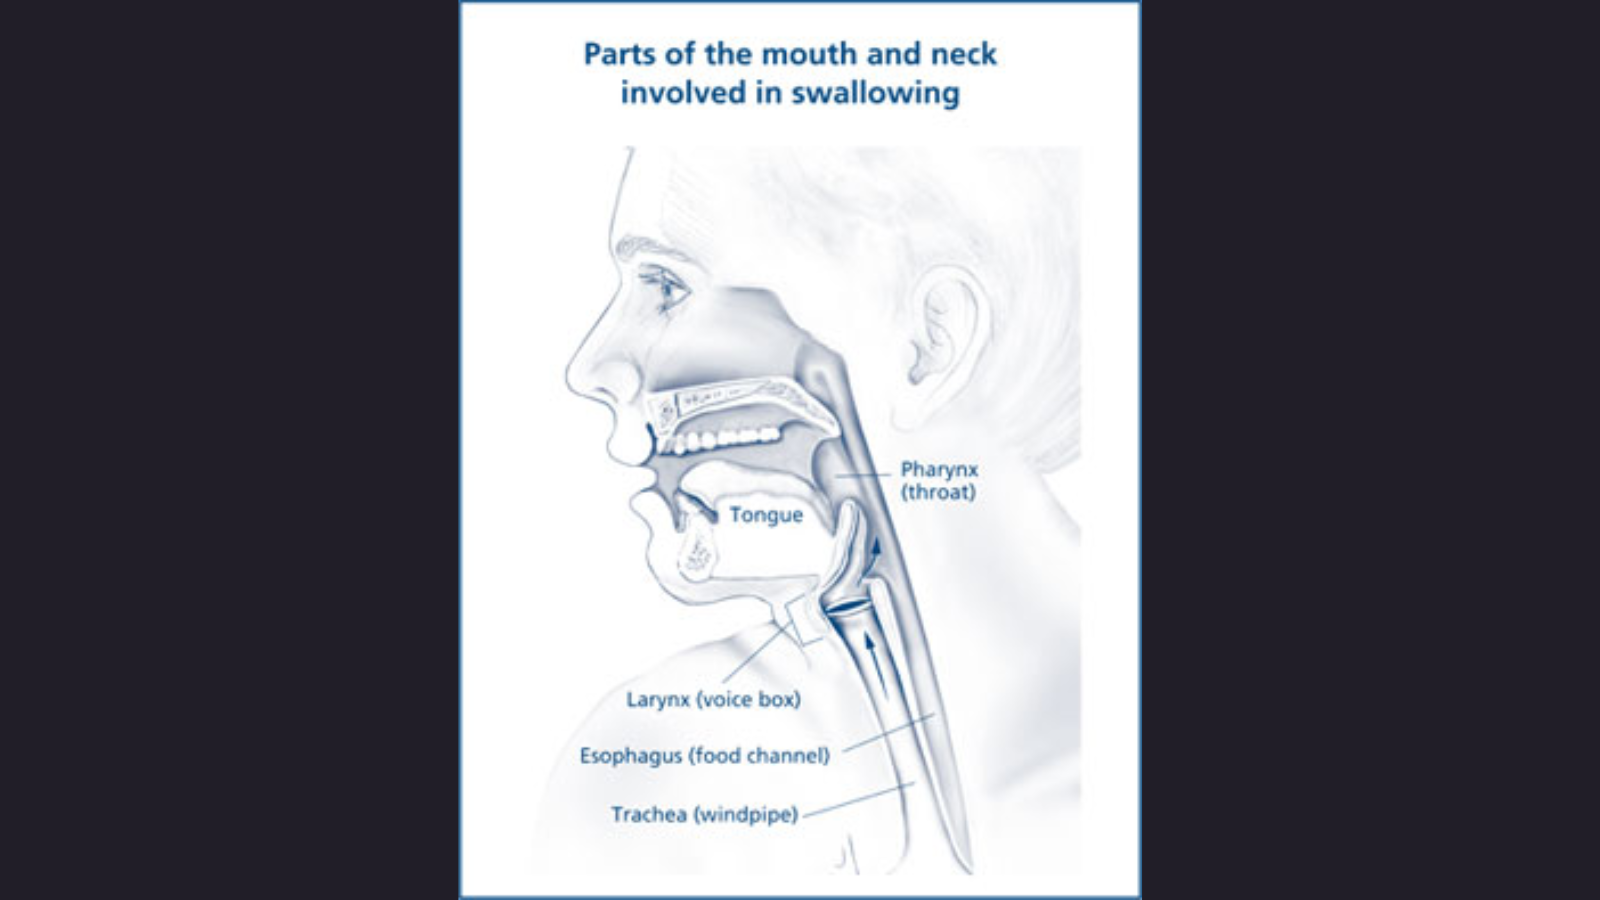 parts of the mouth & neck involved in swallowing